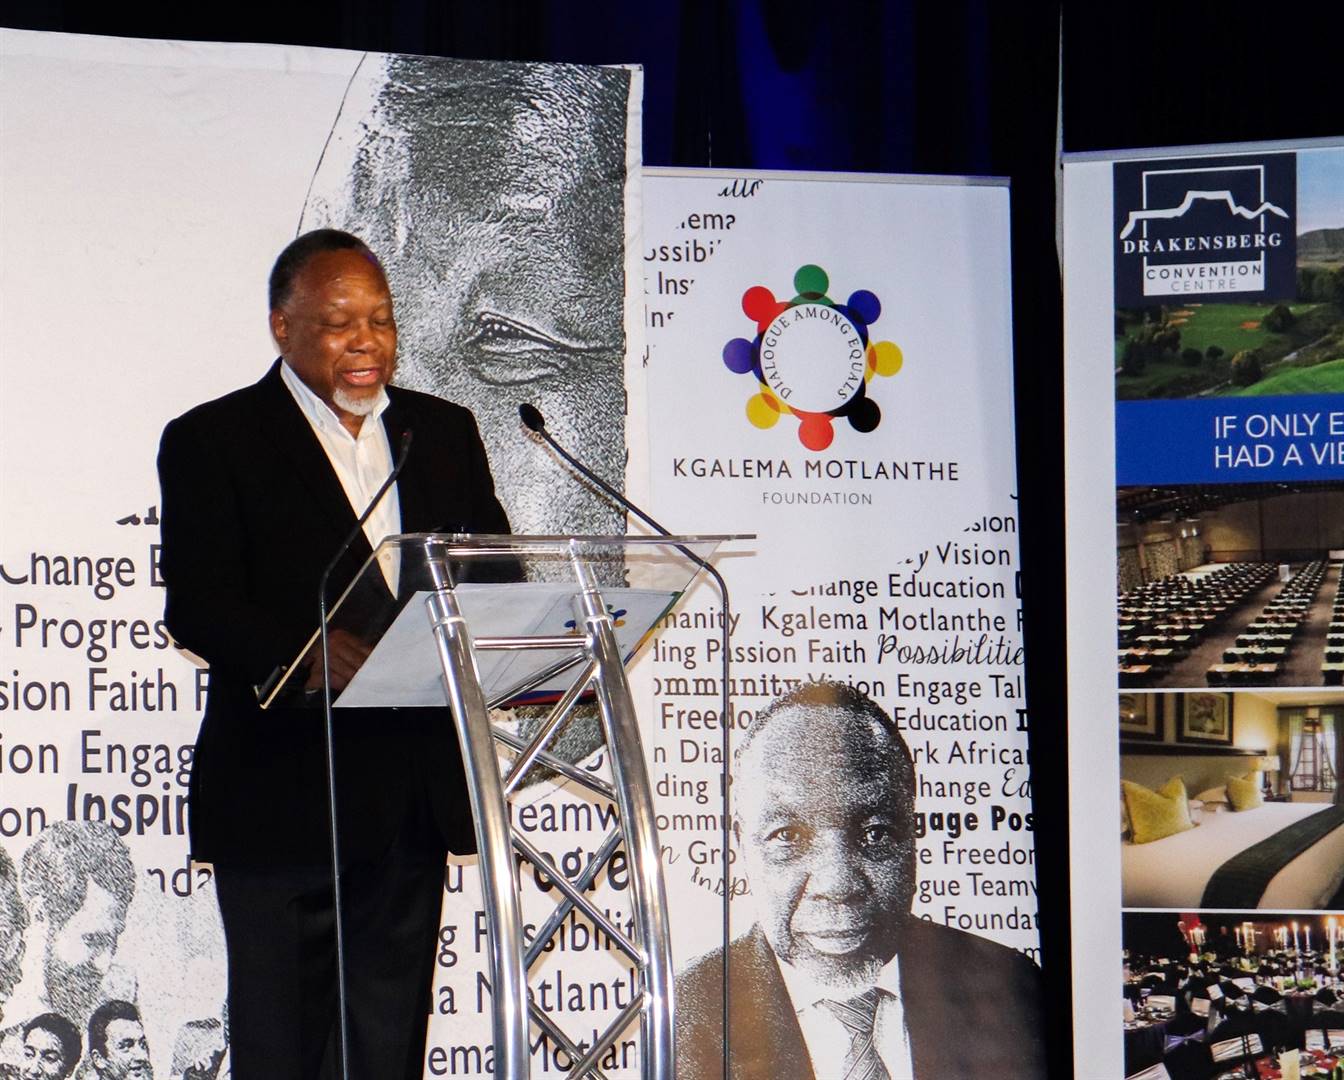 Former president Kgalema Motlanthe said that the forum is a safe space among equals. Picture: Sthembiso Lebuso/City Press